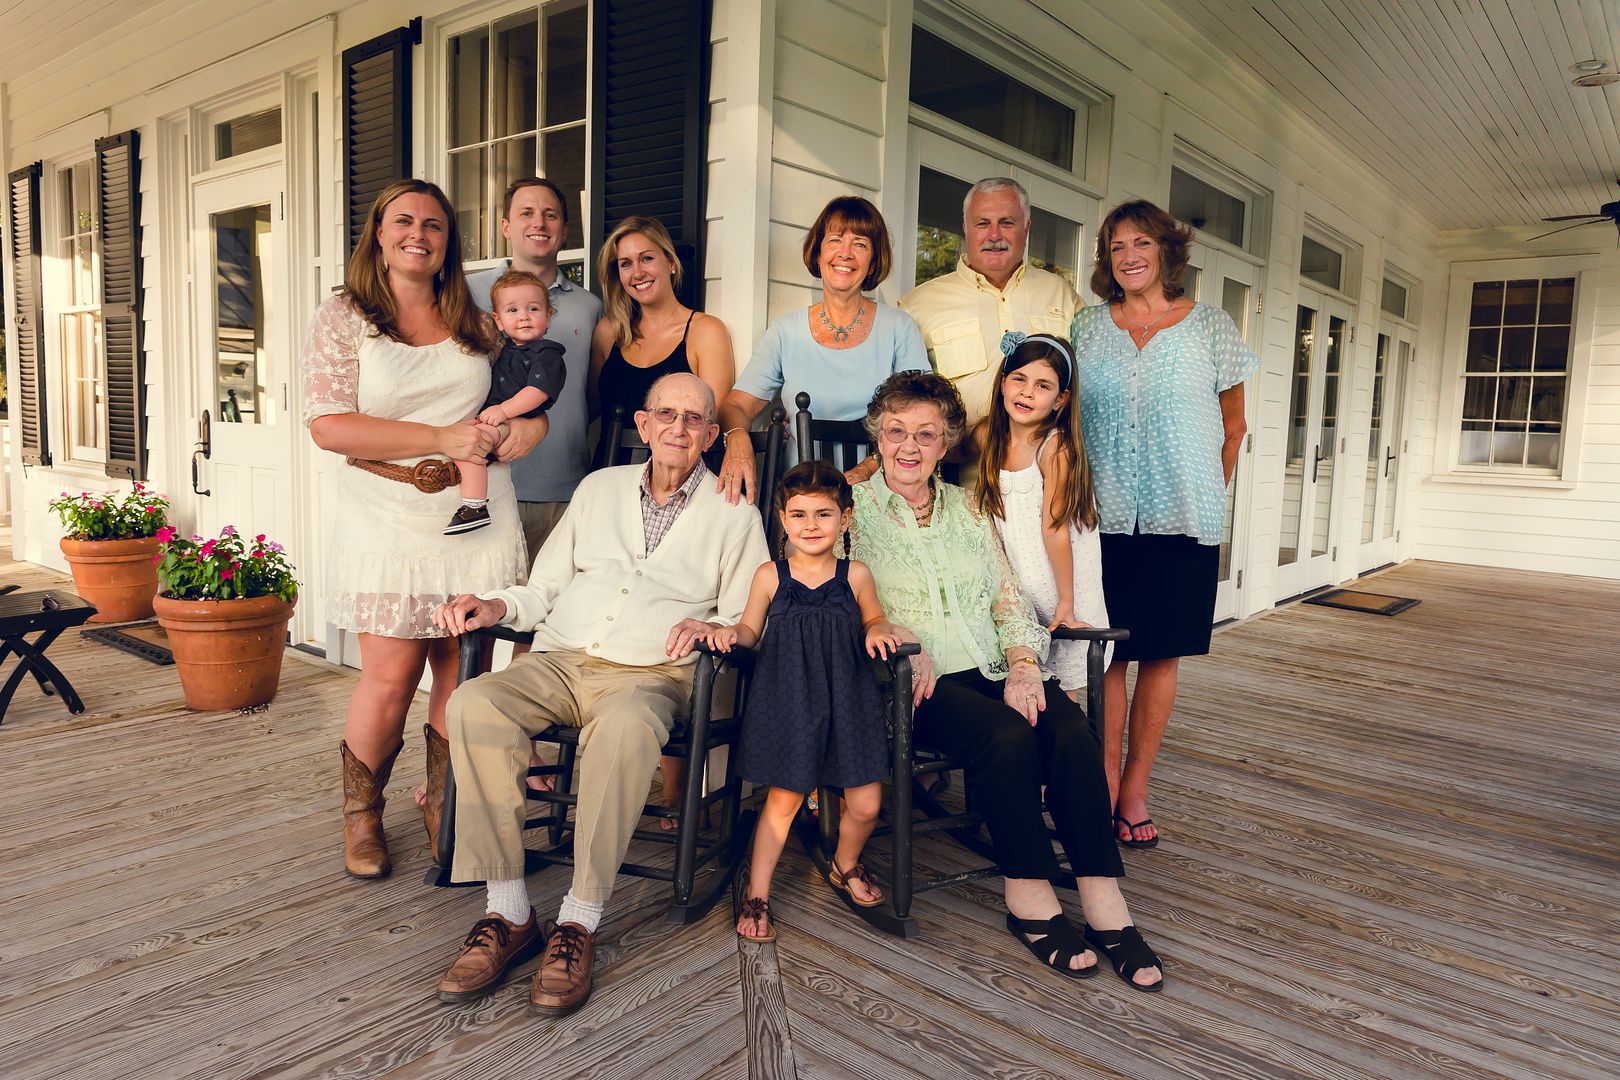 Family Photo Tips from the Pros: Seat Patriarchs and Matriarchs in the middle of a family shot